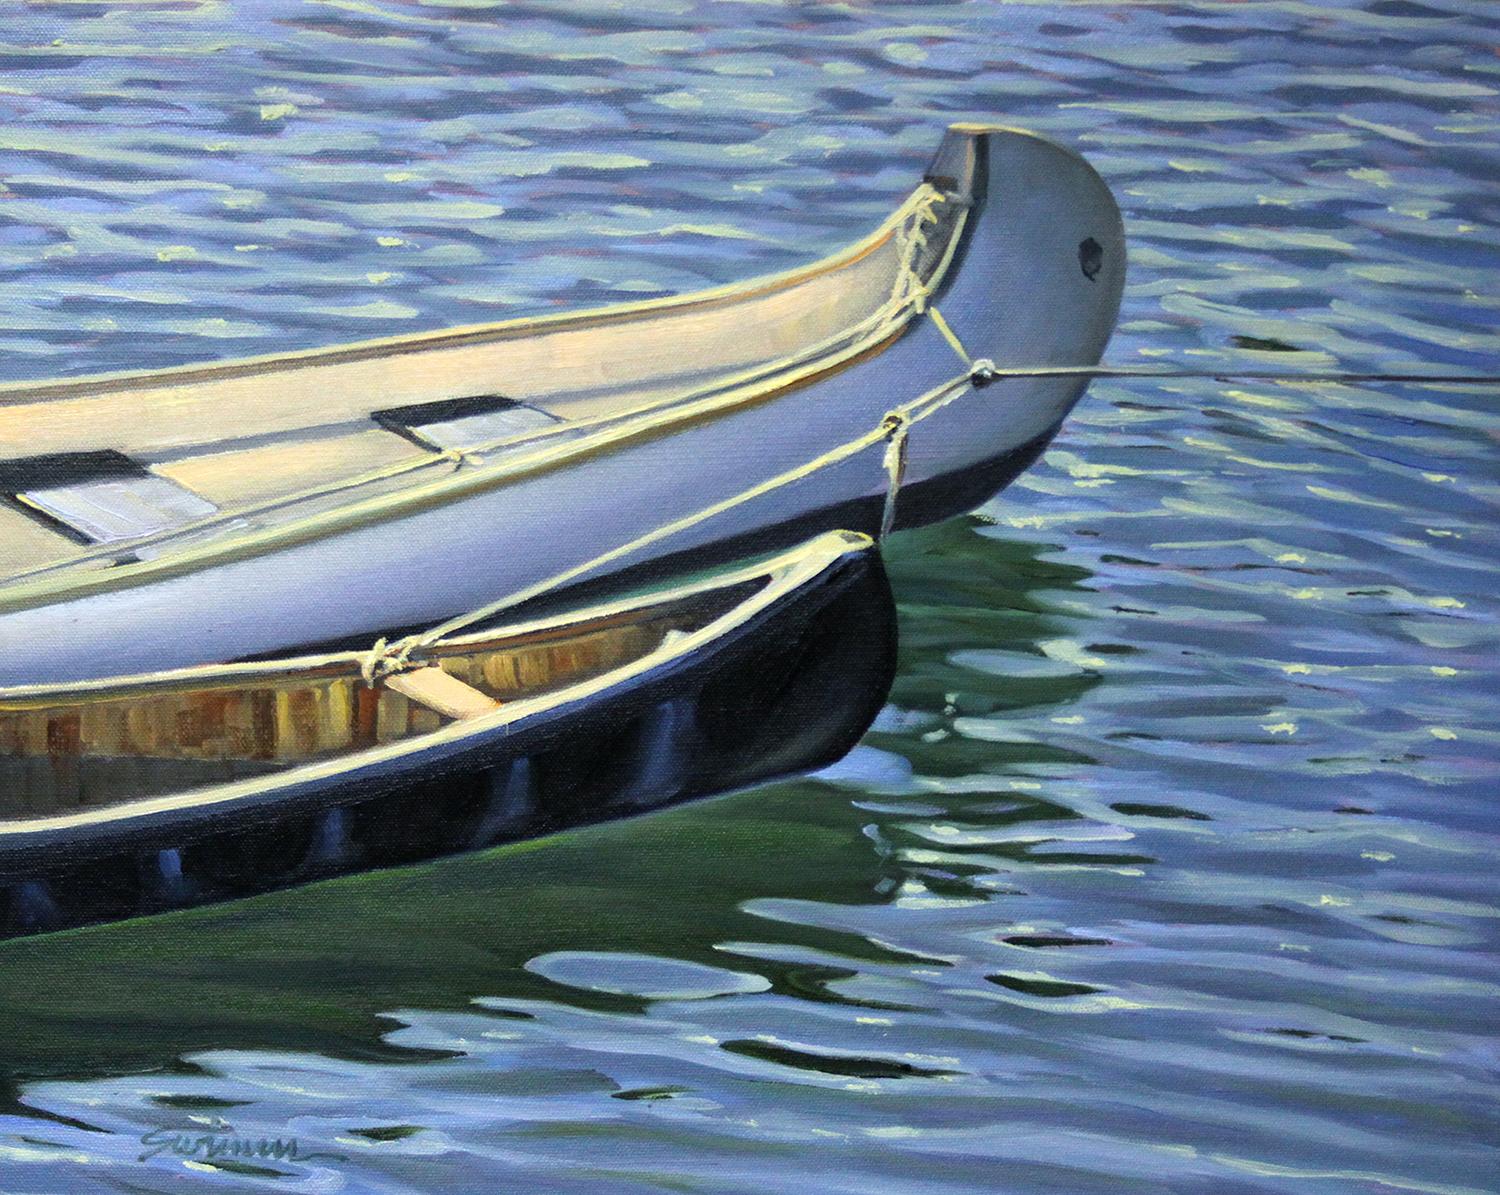 Tom Swimm Landscape Painting -  "Canoe Reflections"  Wooden Canoes Tied Up With Glowing Water Reflections